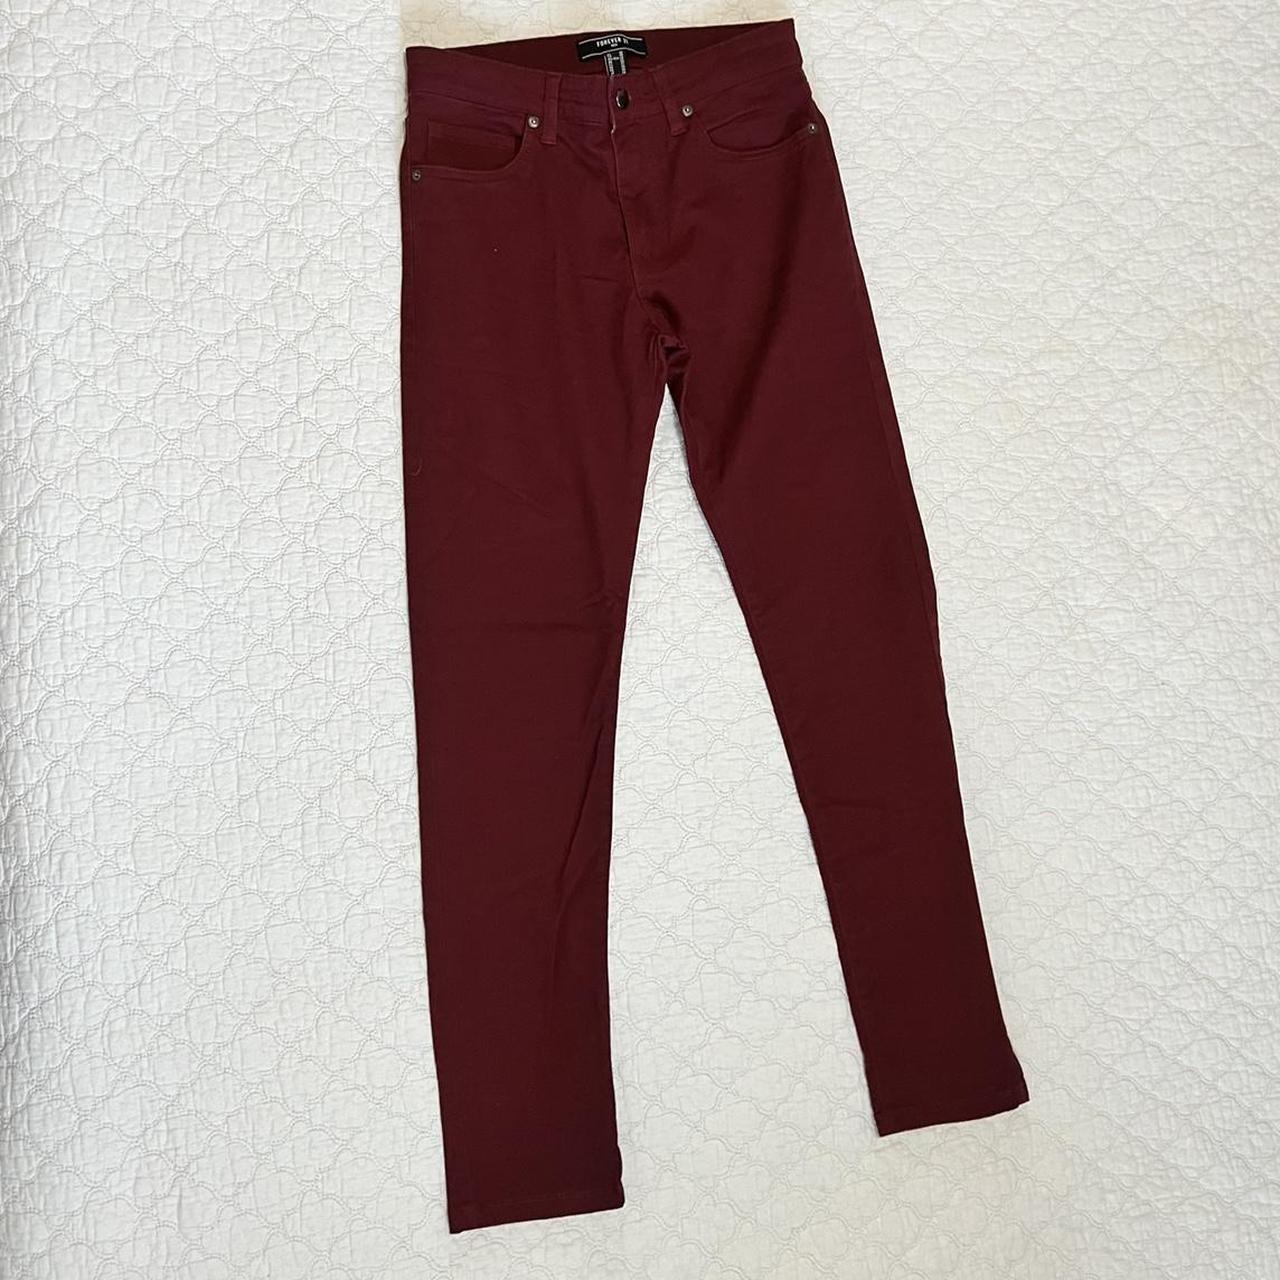 H&M Burgundy Pants Brand new, never worn out. Size... - Depop